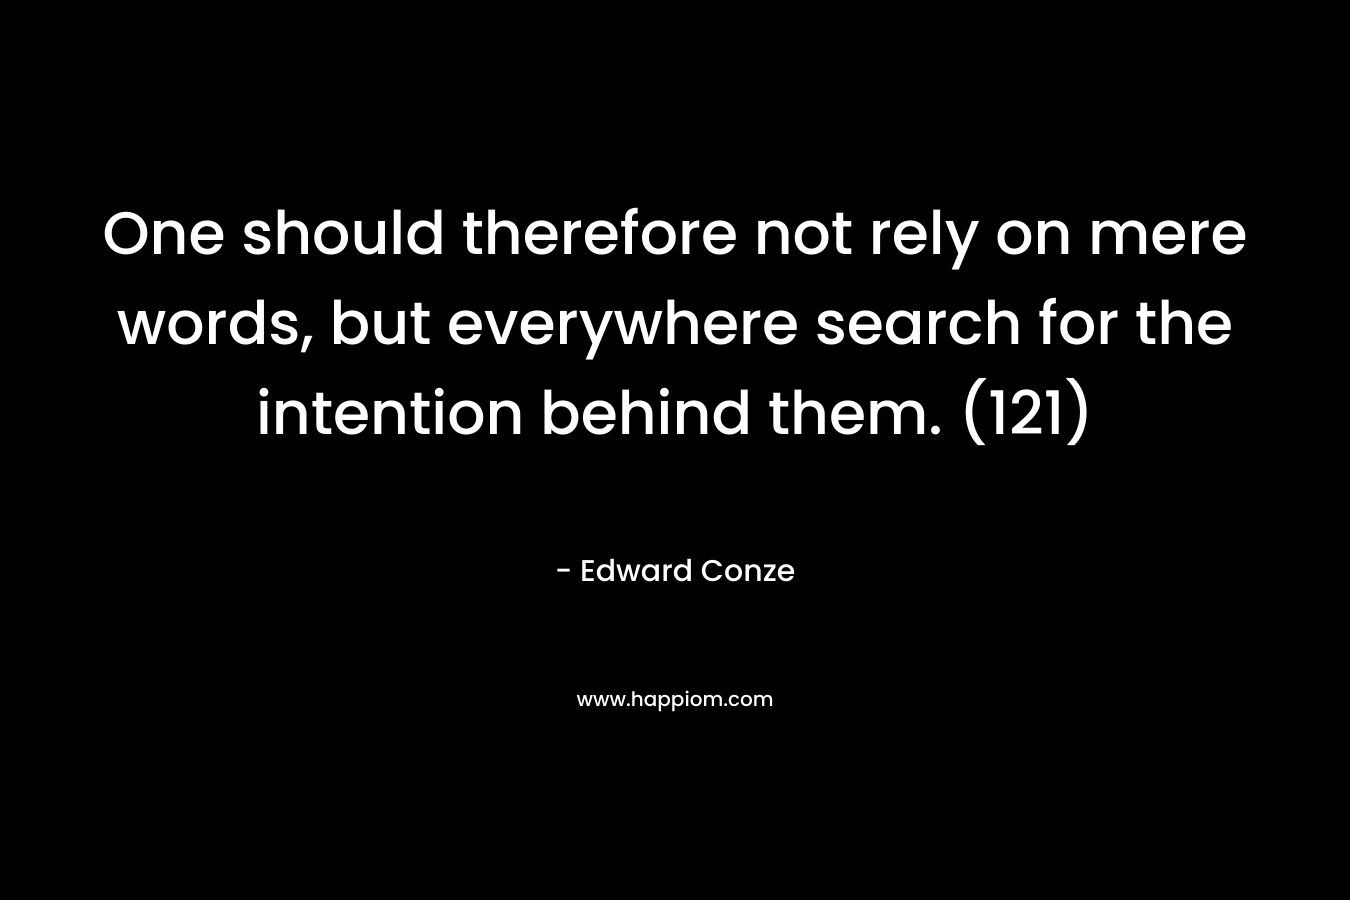 One should therefore not rely on mere words, but everywhere search for the intention behind them. (121) – Edward Conze